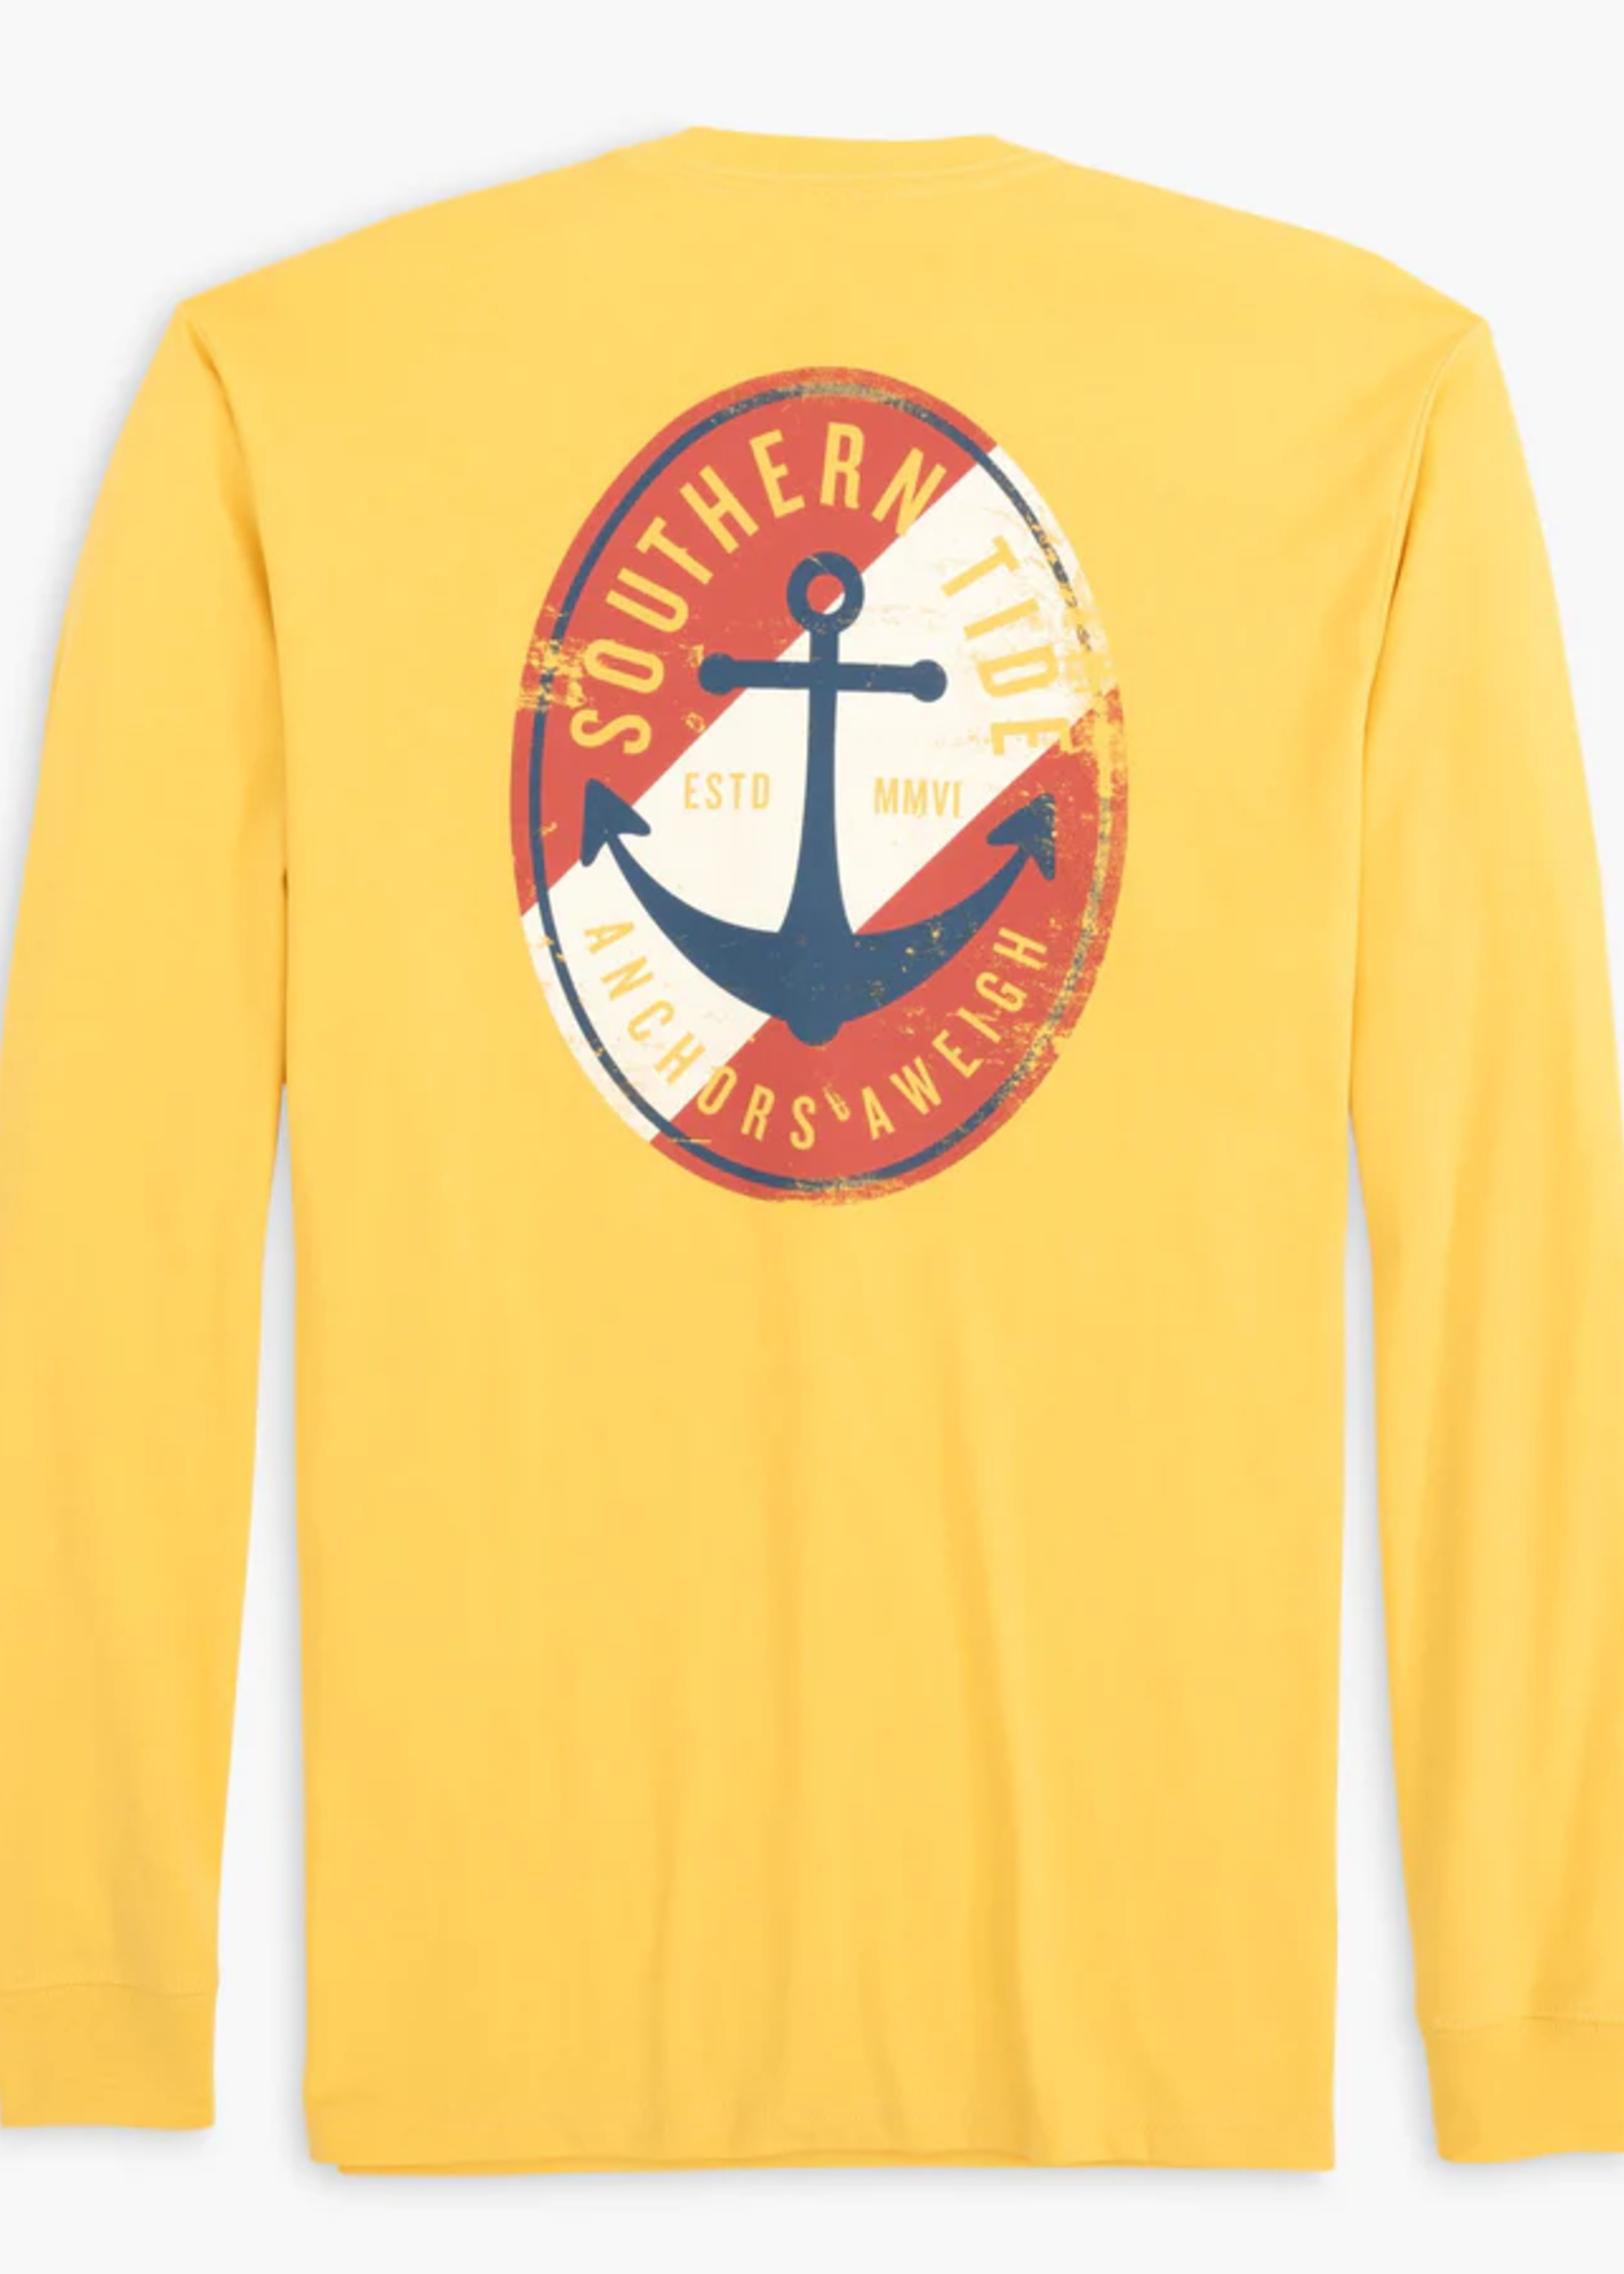 Southern Tide Anchors Aweigh Long Sleeve T-Shirt